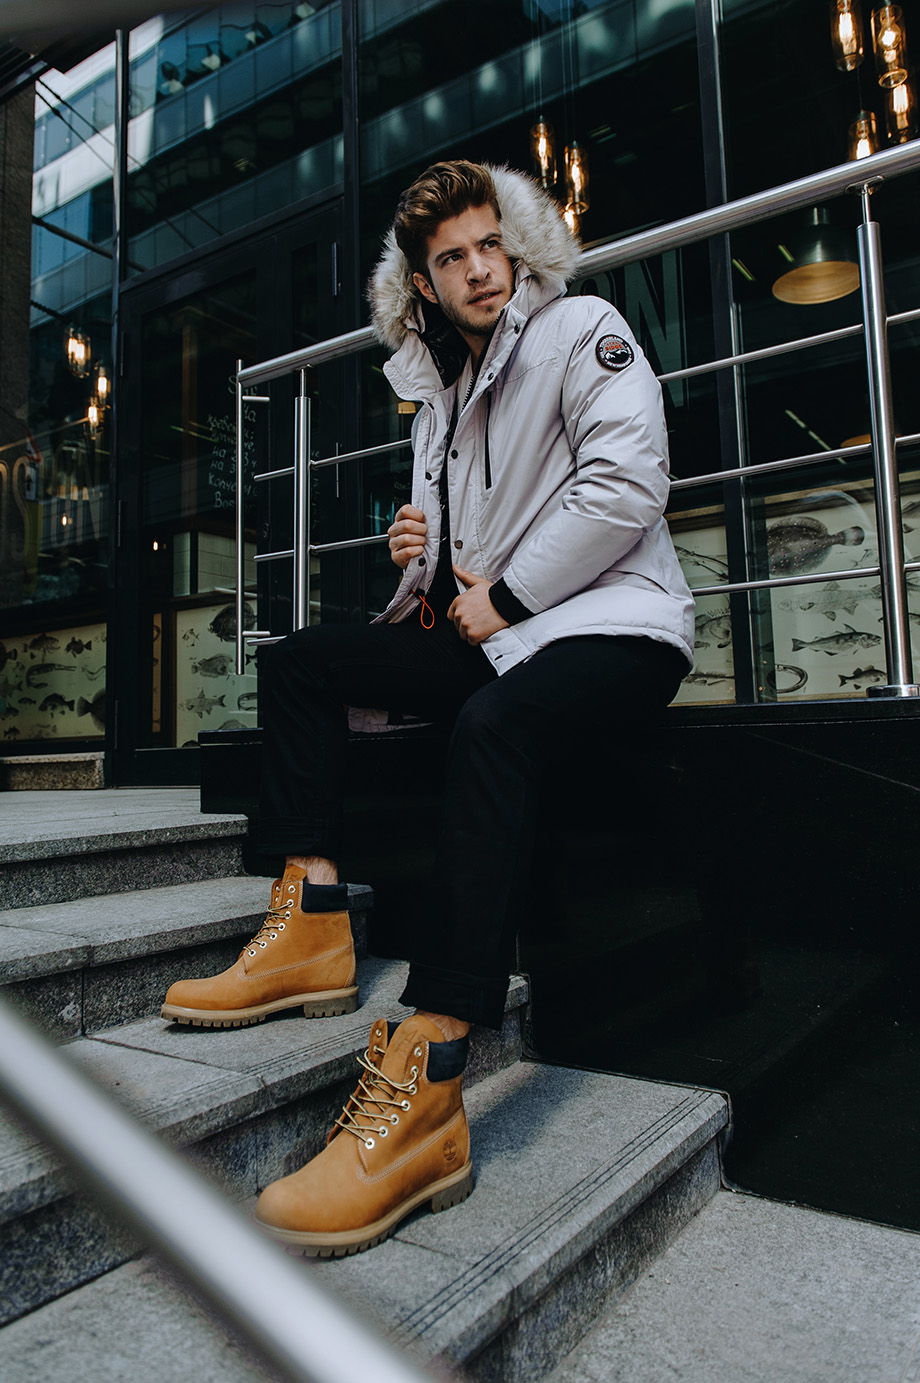 Timberland boots are great winter footwear